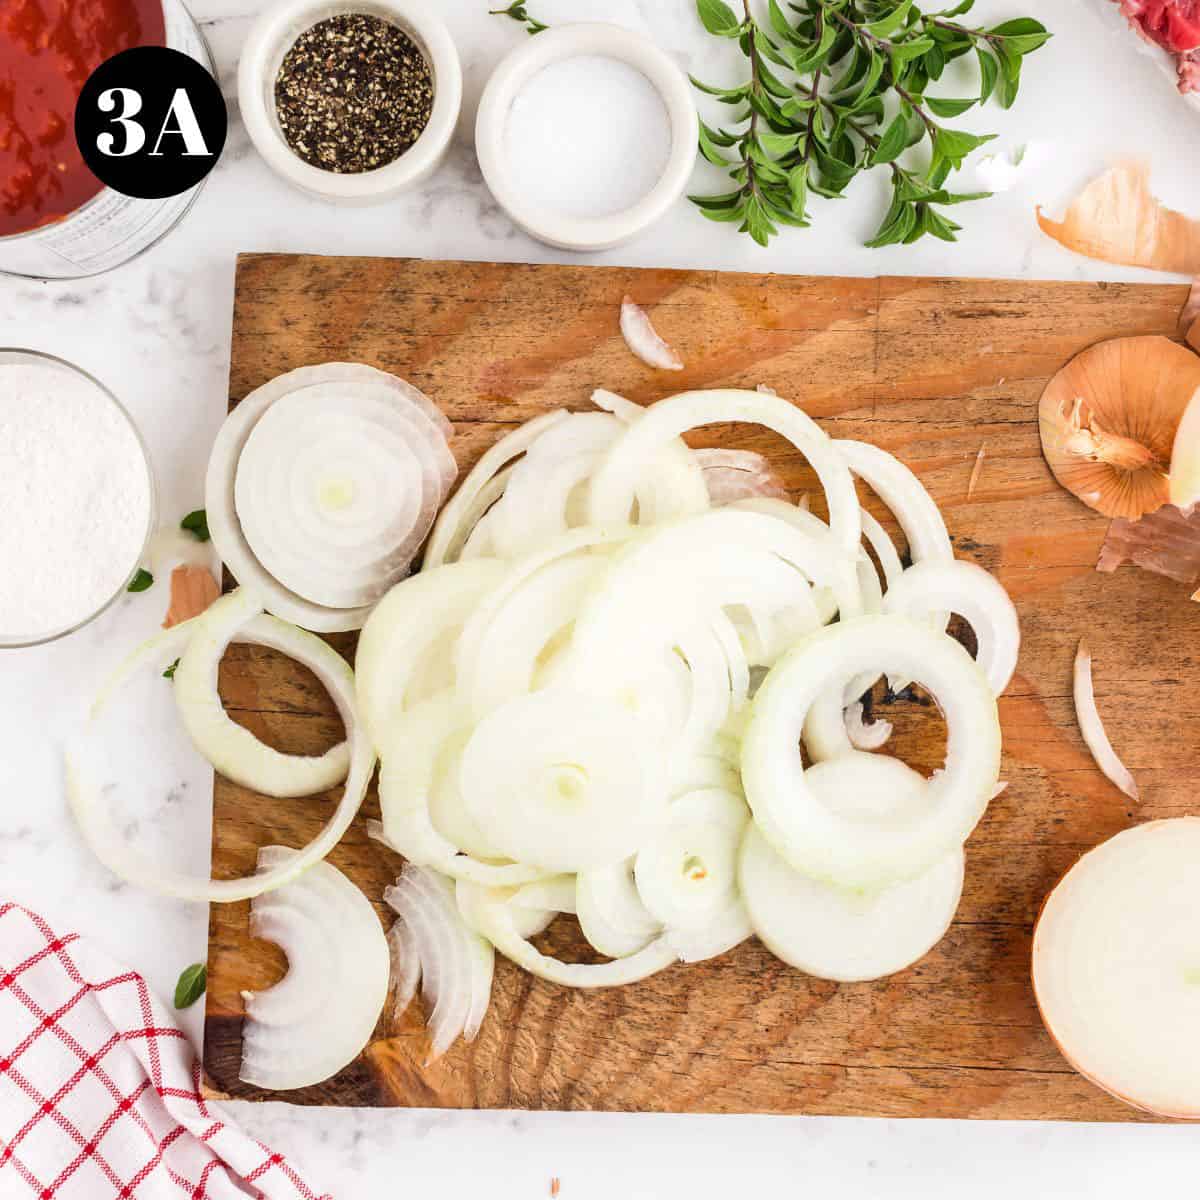 A bunch of sliced onions on a cutting board.